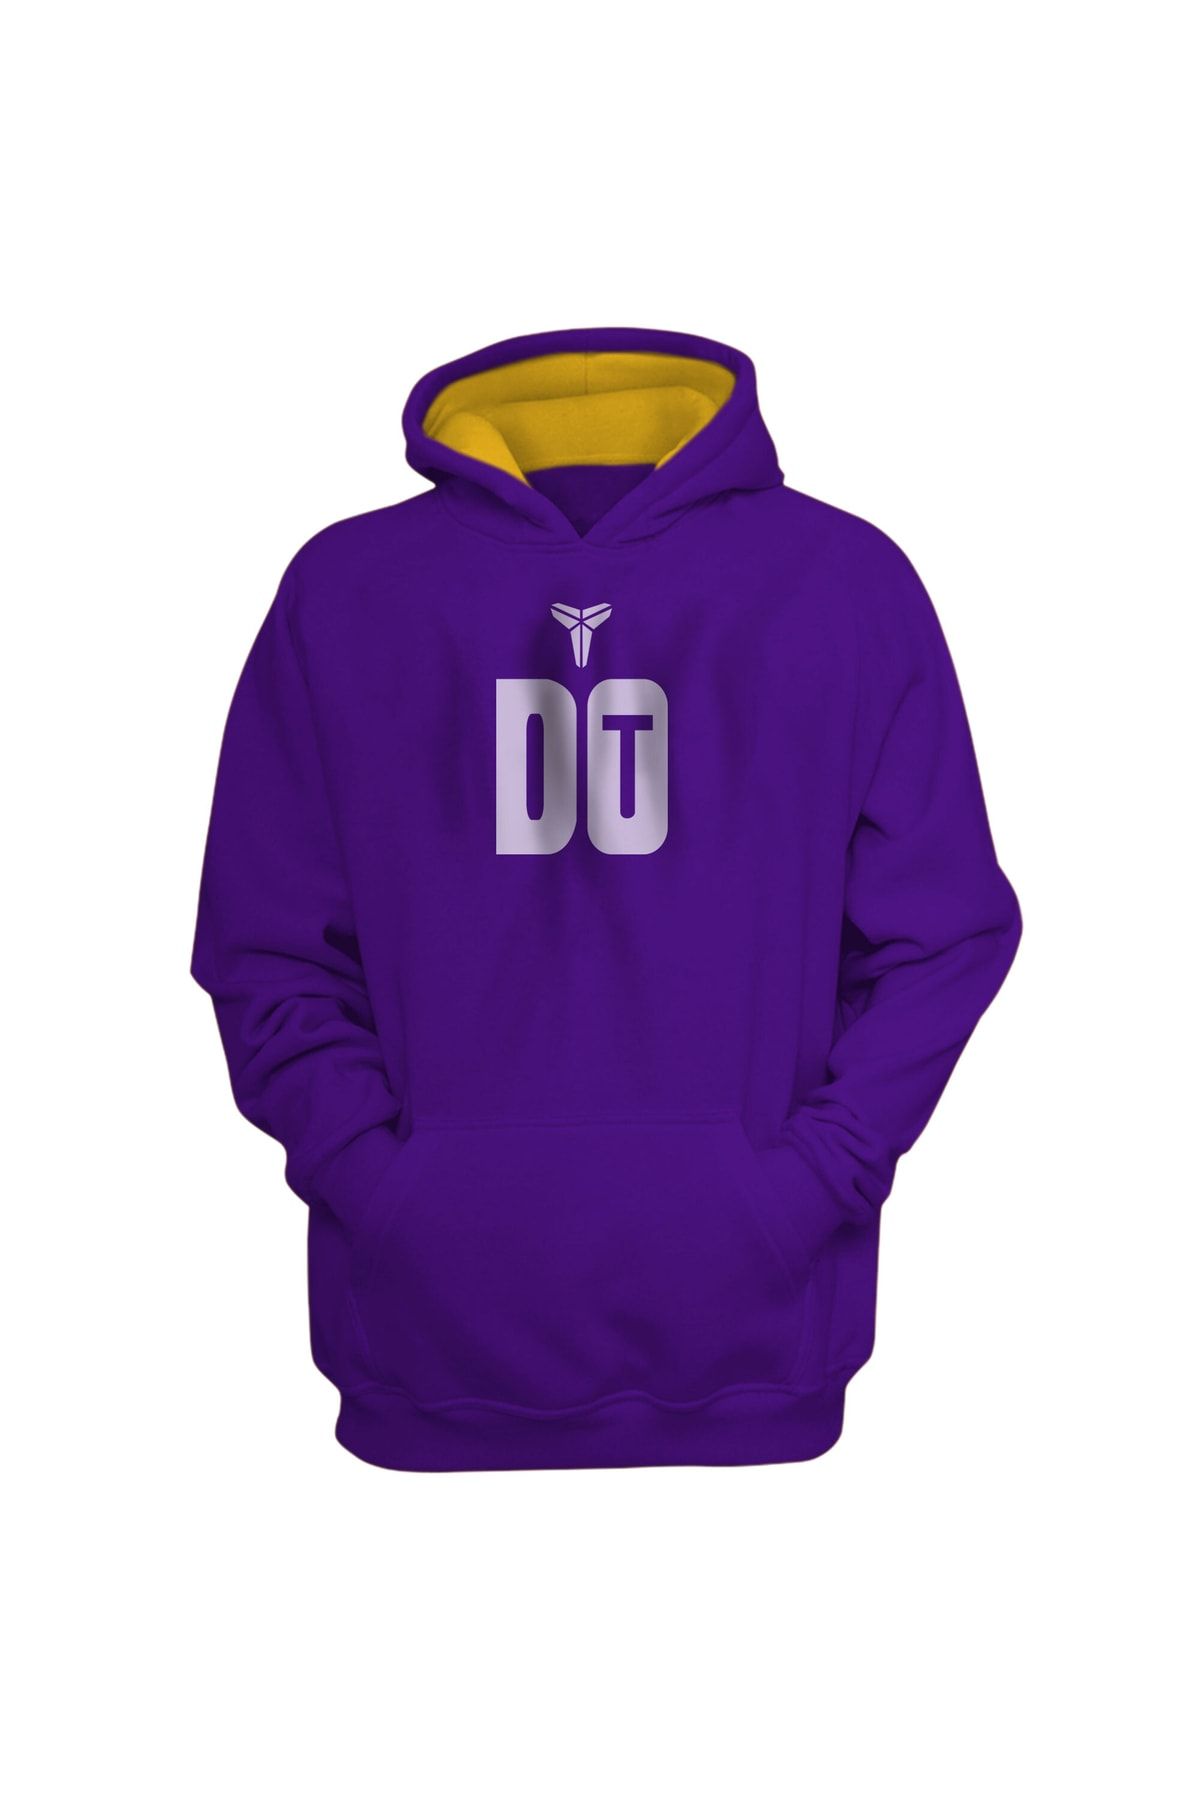 Usateamfans Do It Hoodie